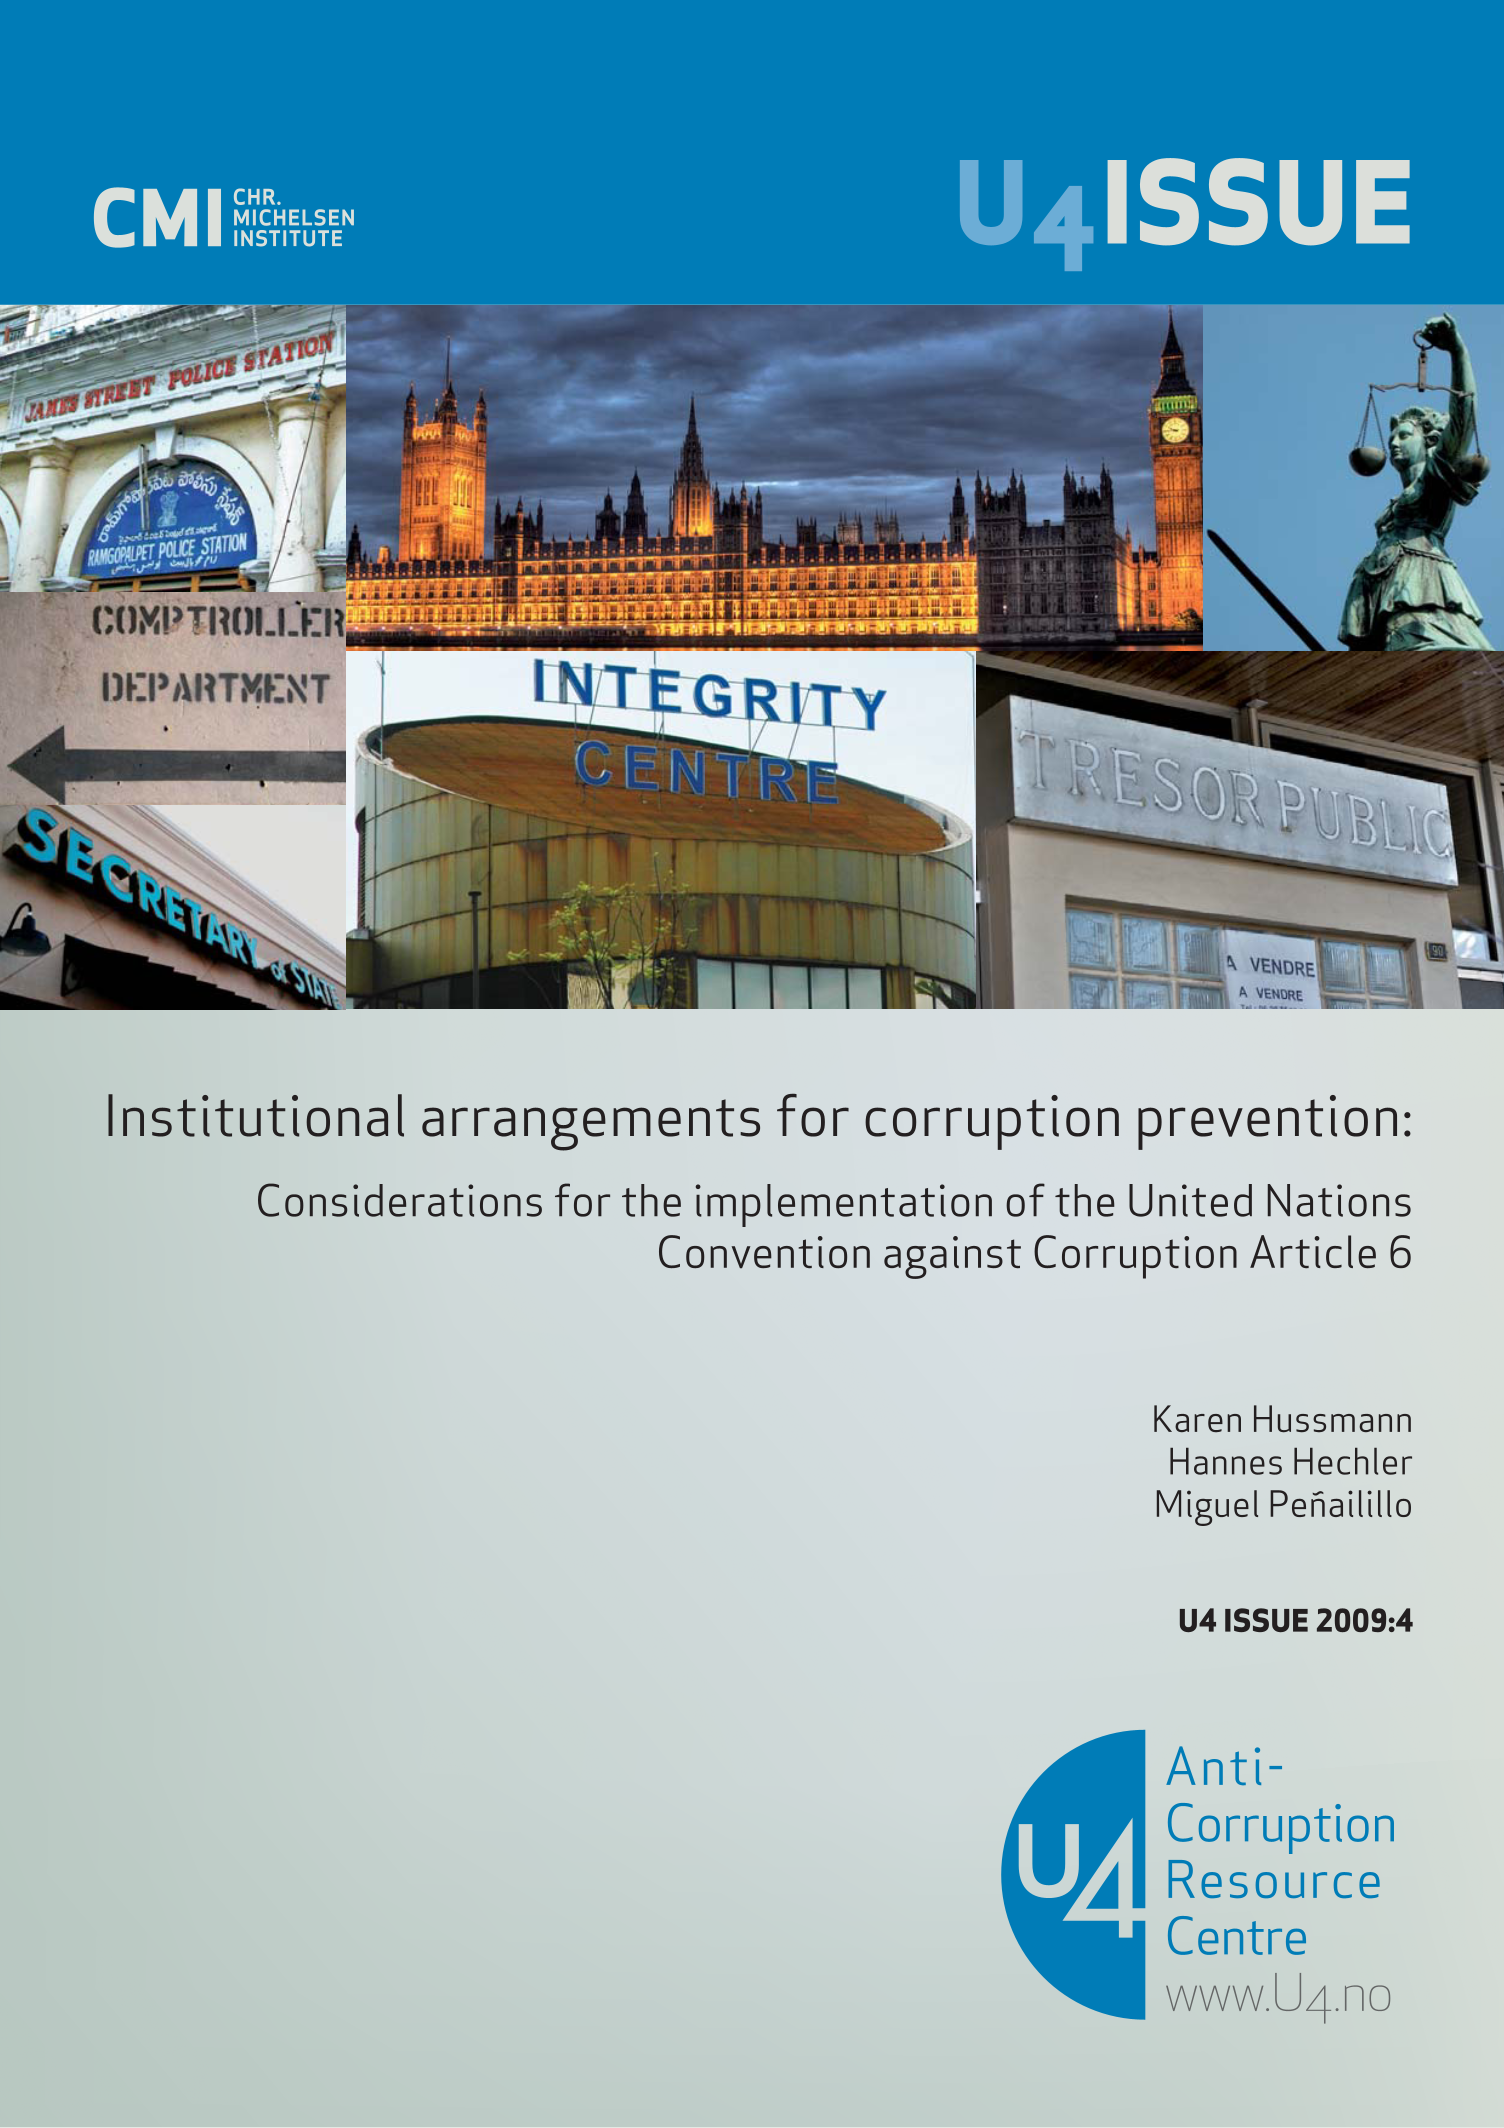 Institutional arrangements for corruption prevention: Considerations for the implementation of the United Nations convention against corruption article 6